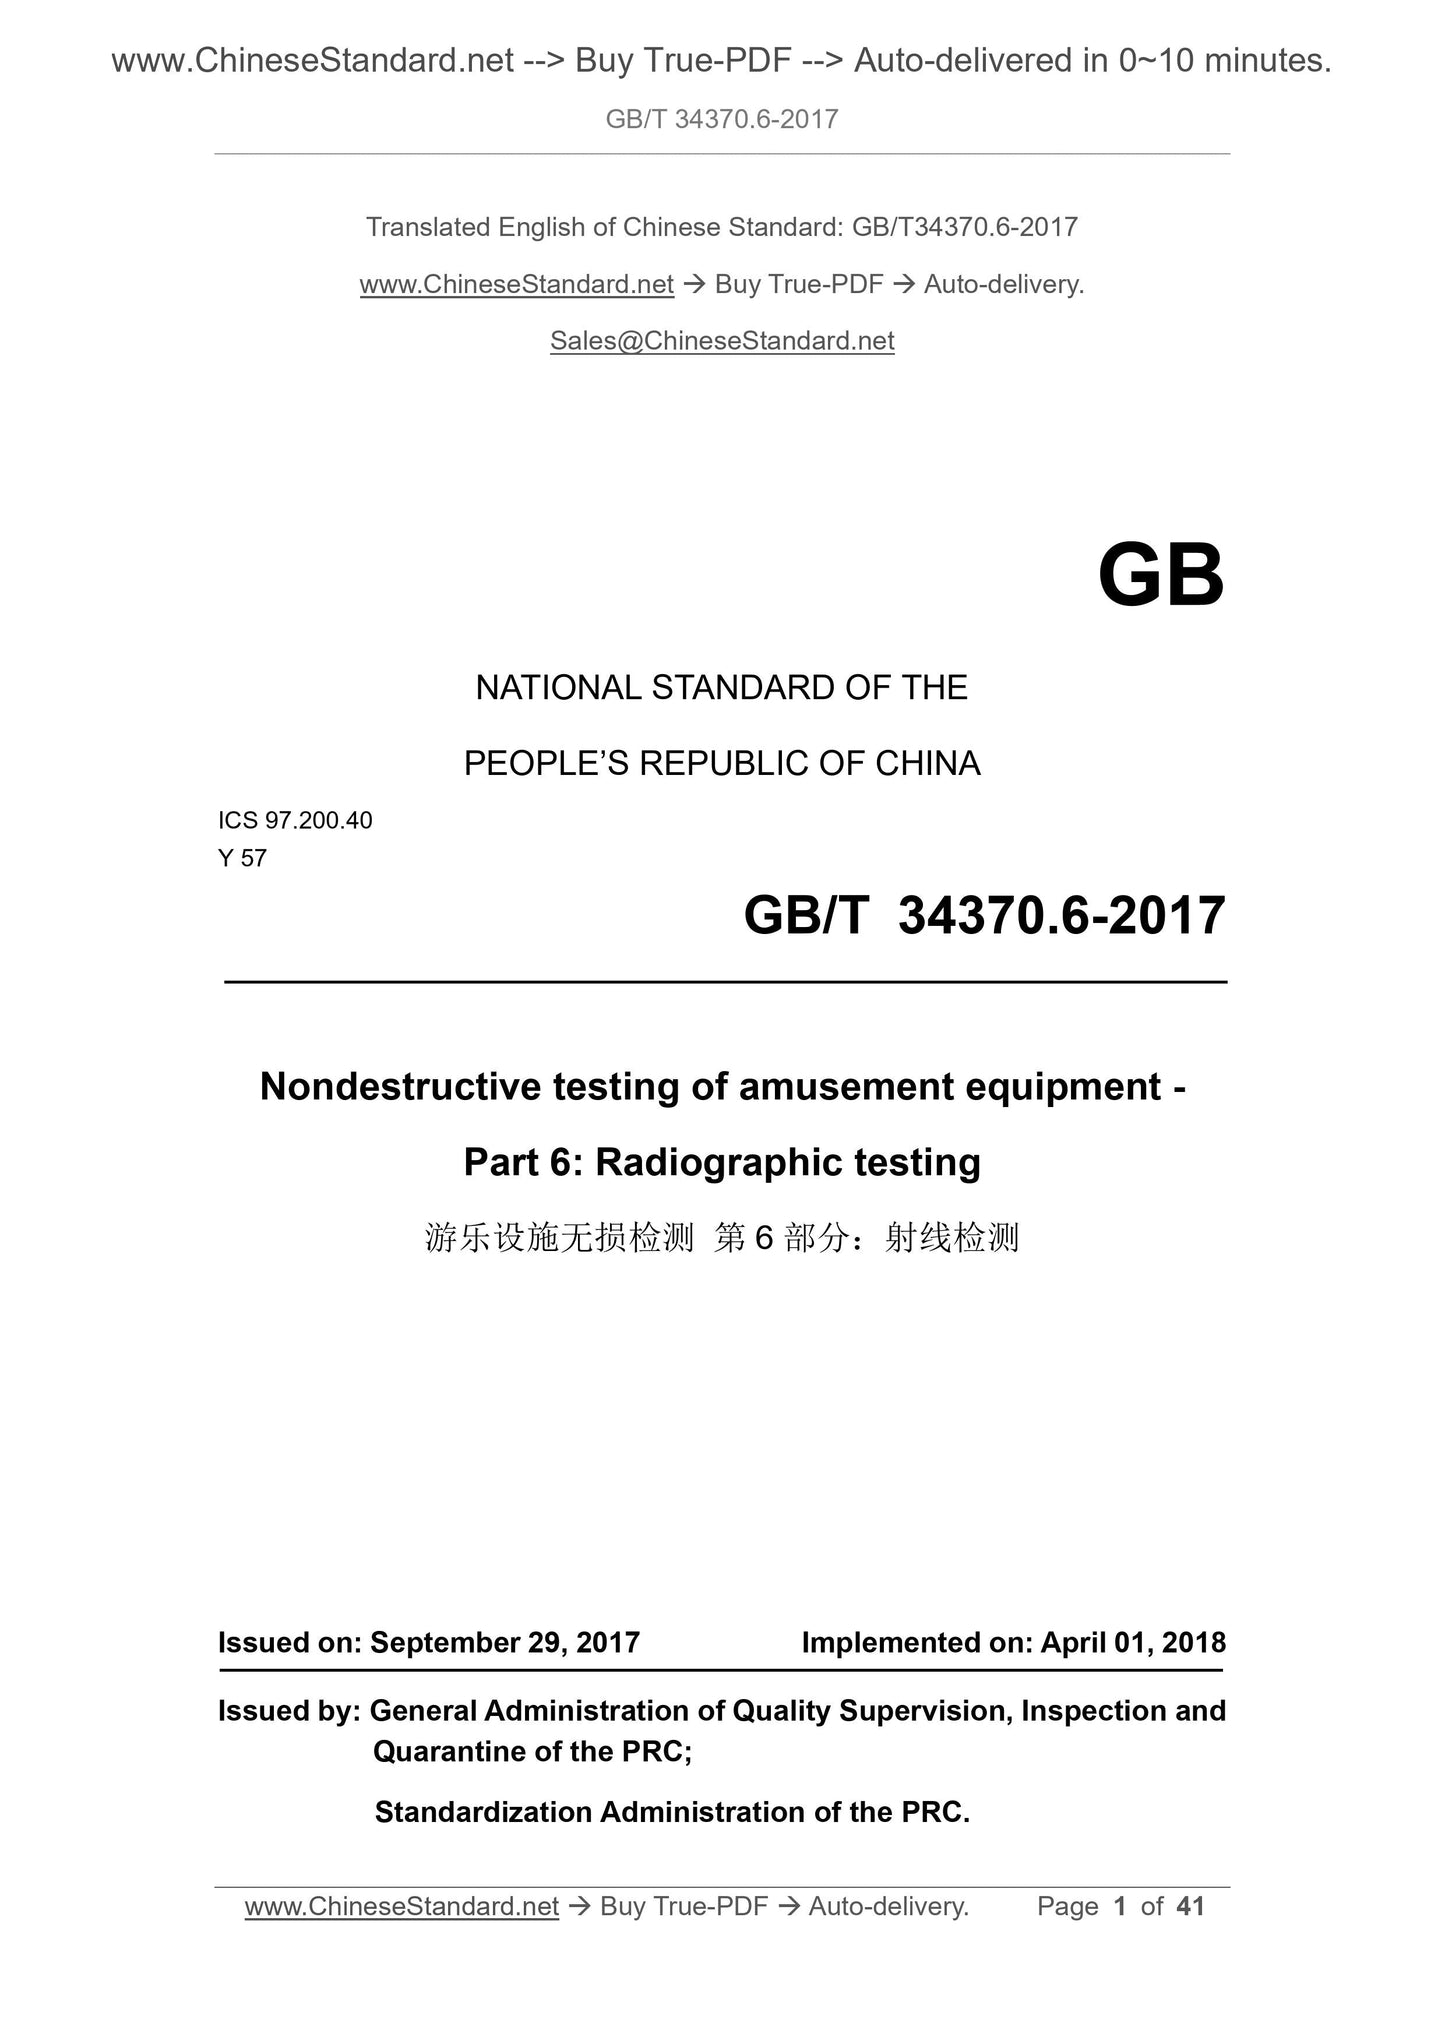 GB/T 34370.6-2017 Page 1